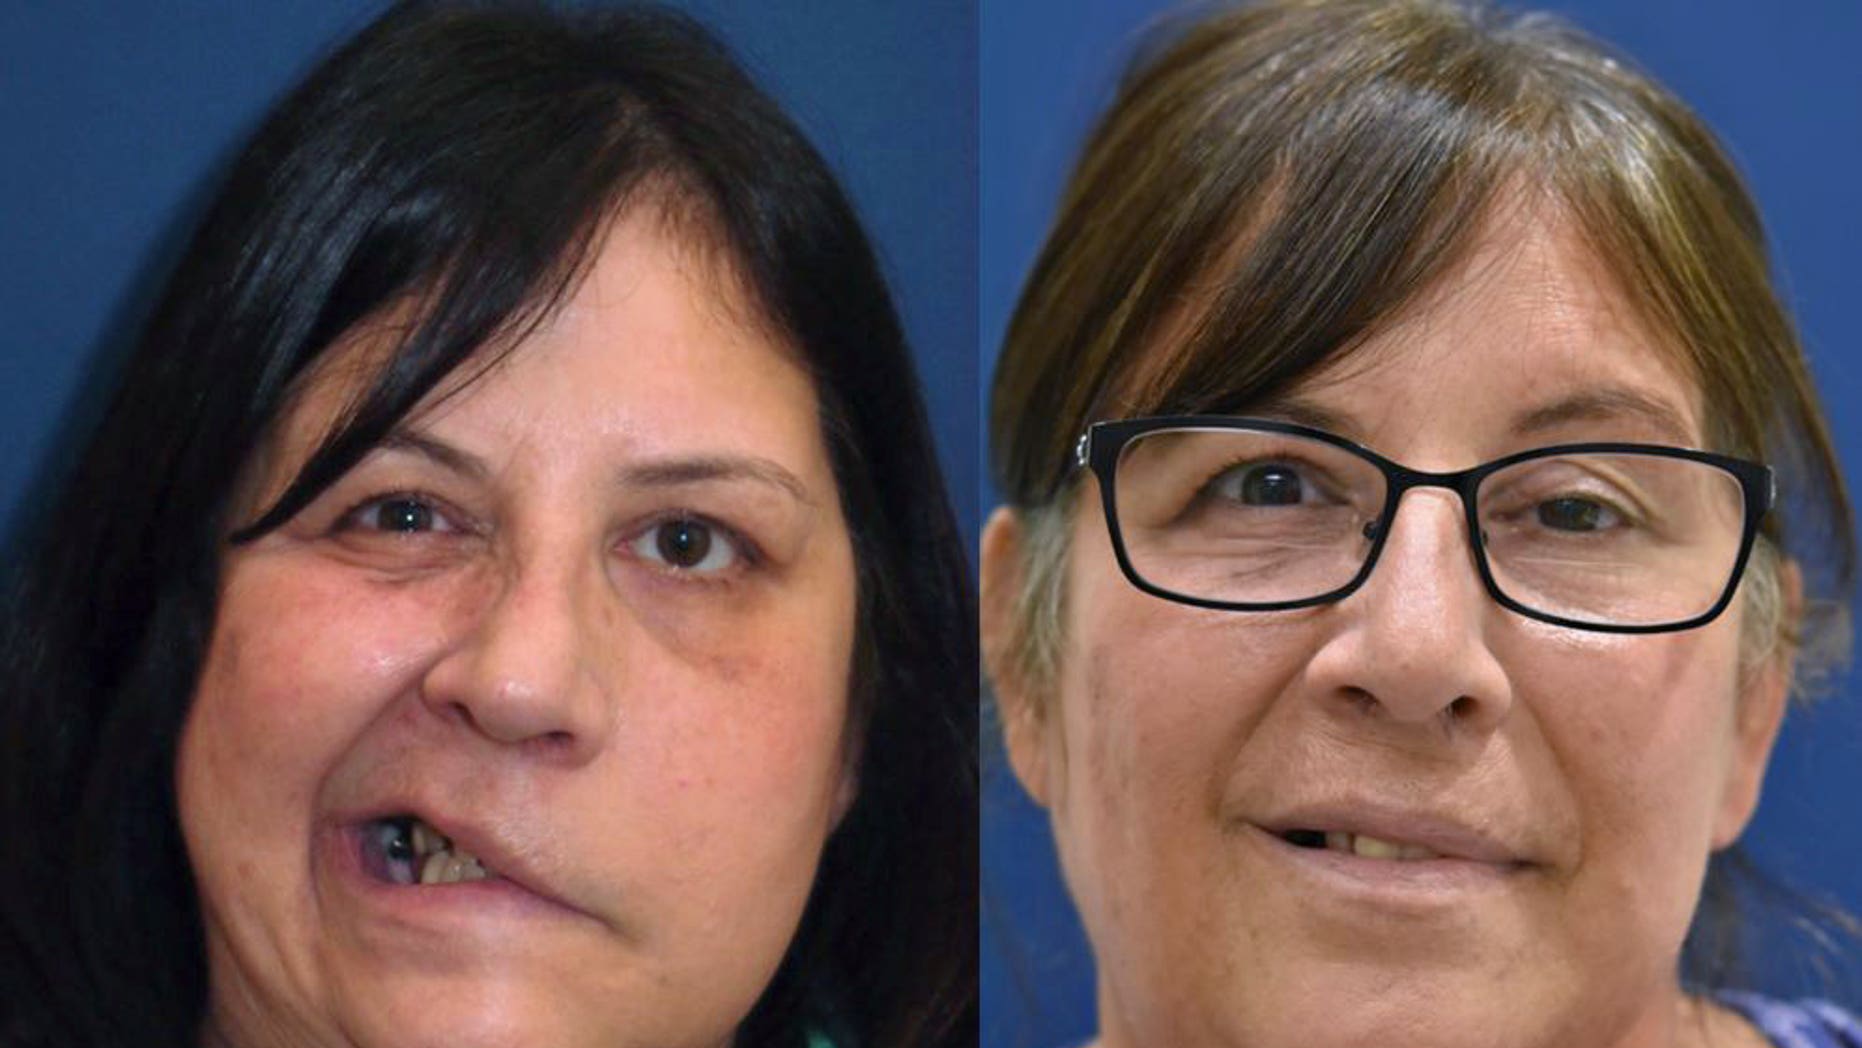 Jarmilla "Jarm" Hawes before and after a surgery that restored her smile 2.5 years after suffering a stroke.